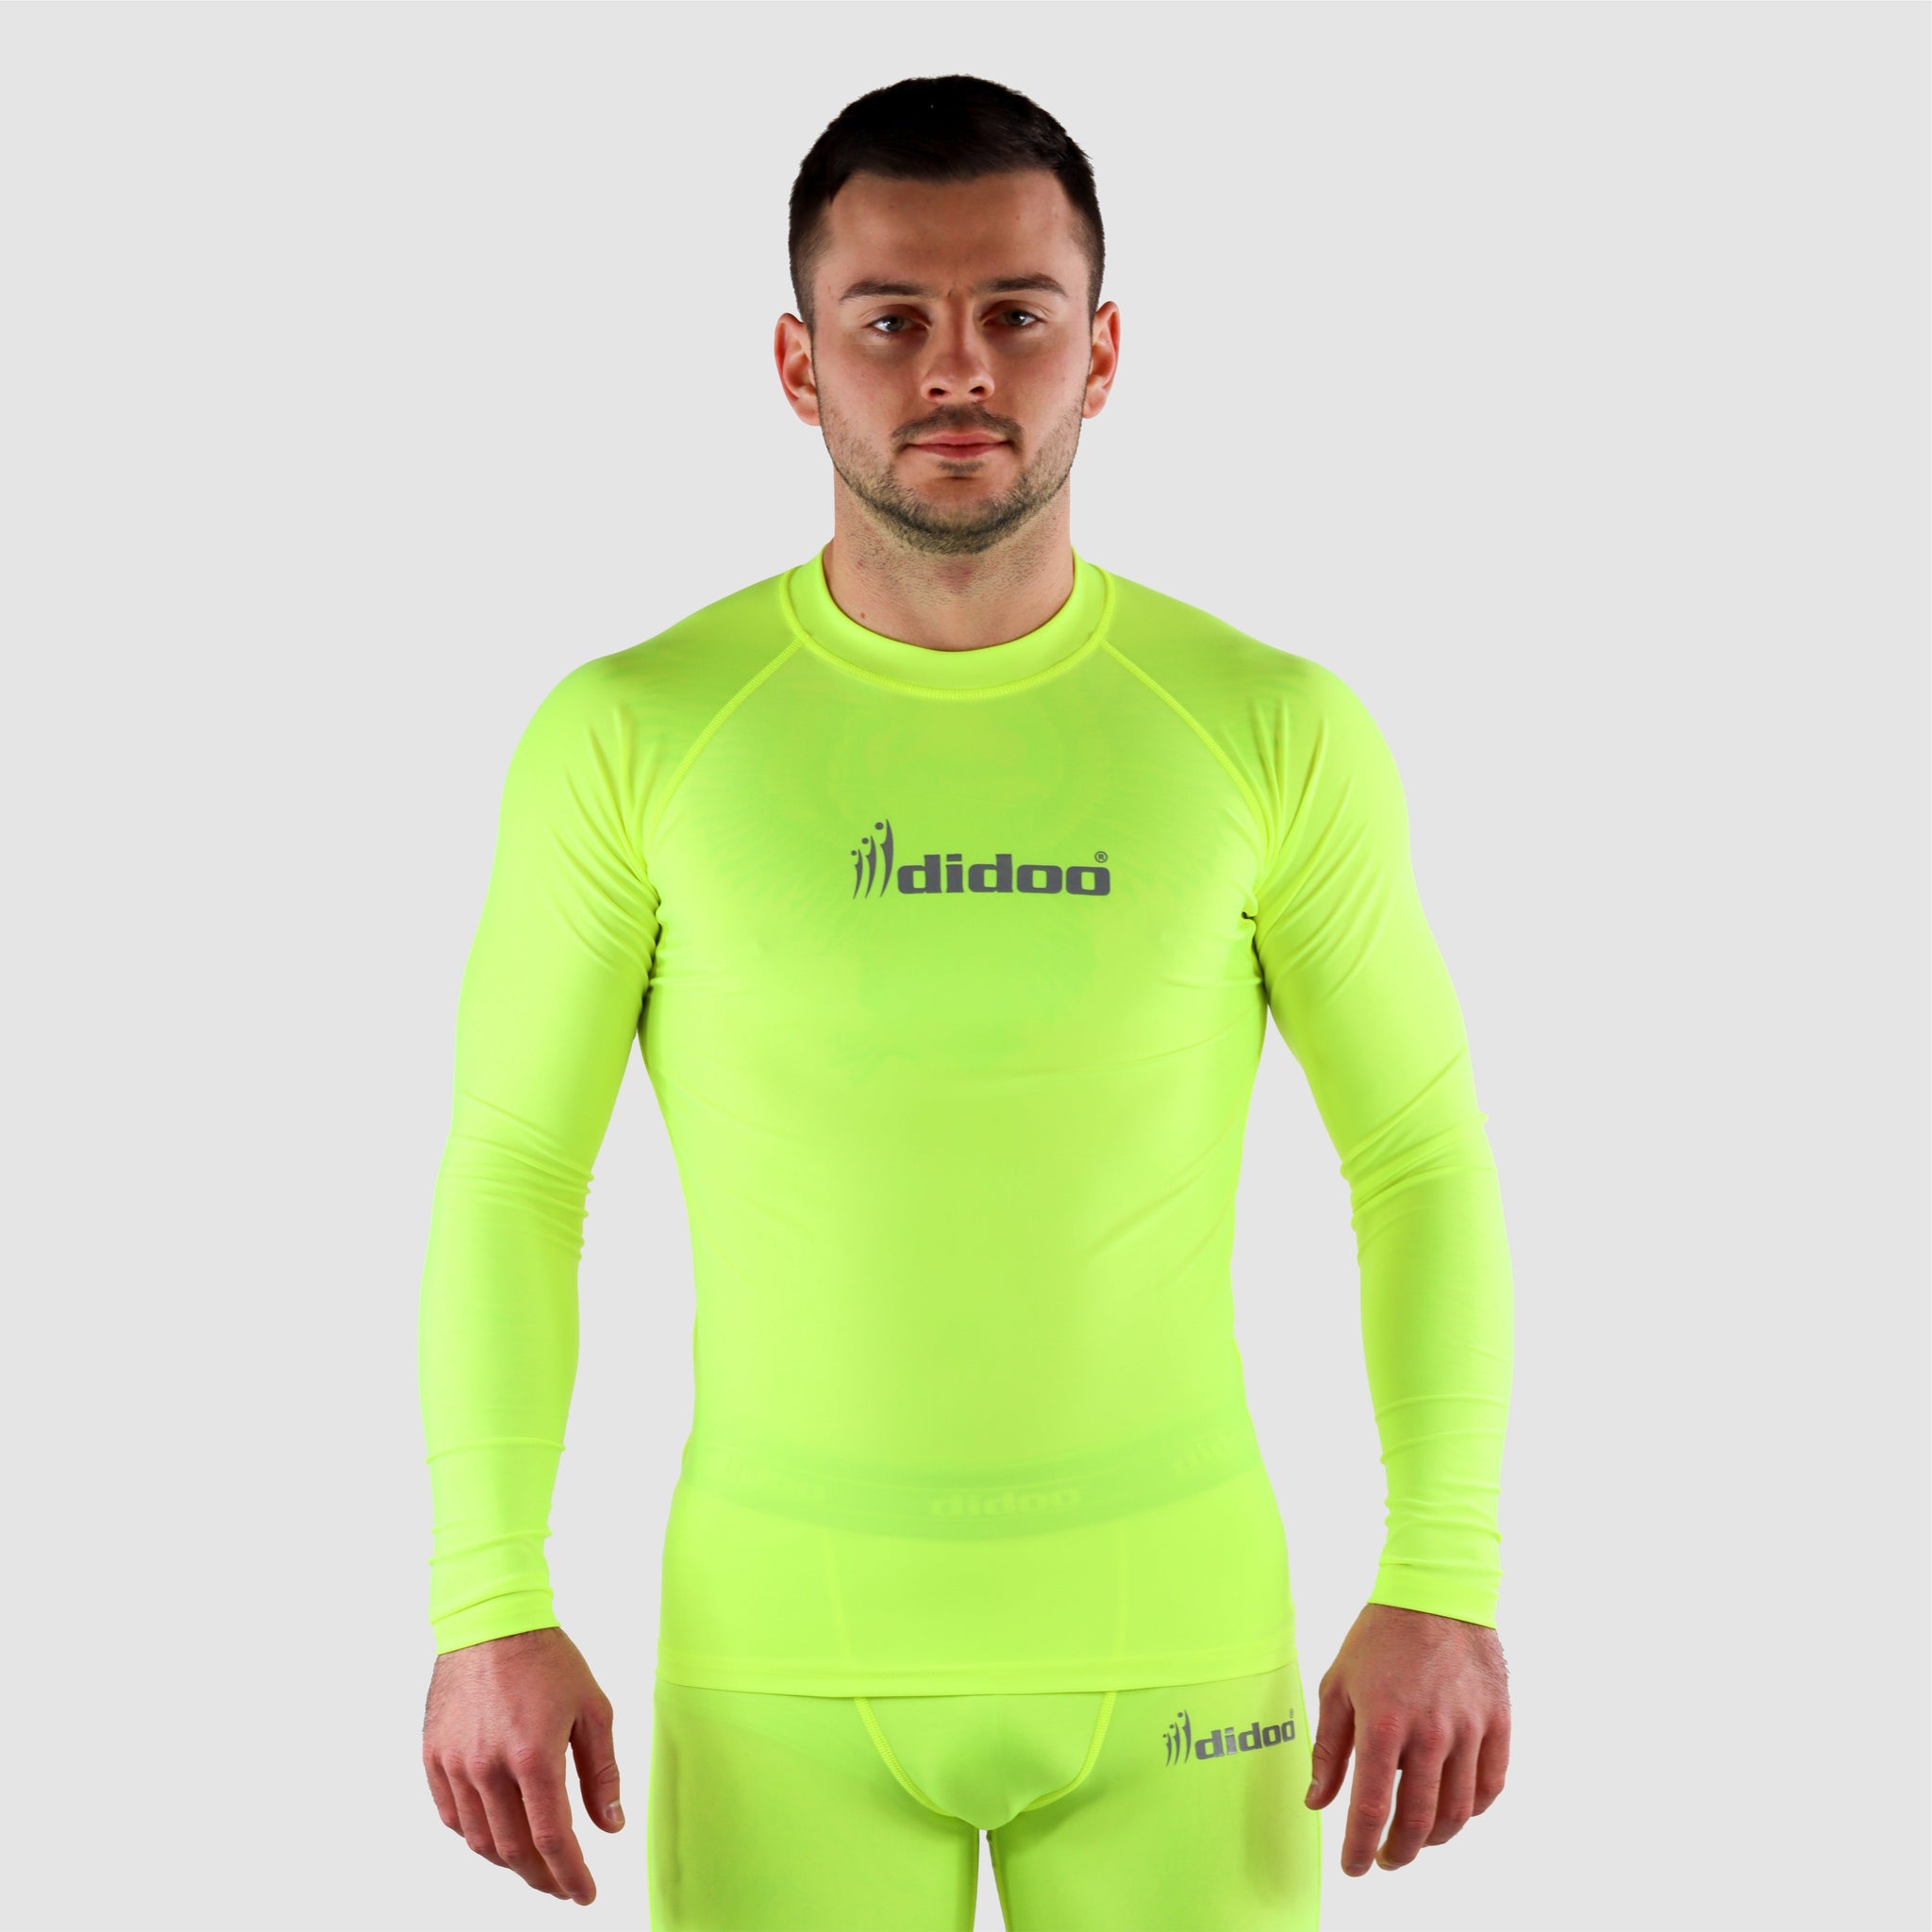 Fluorescent Yellow DiDOO Men's Compression Baselayer Top Long Sleeve